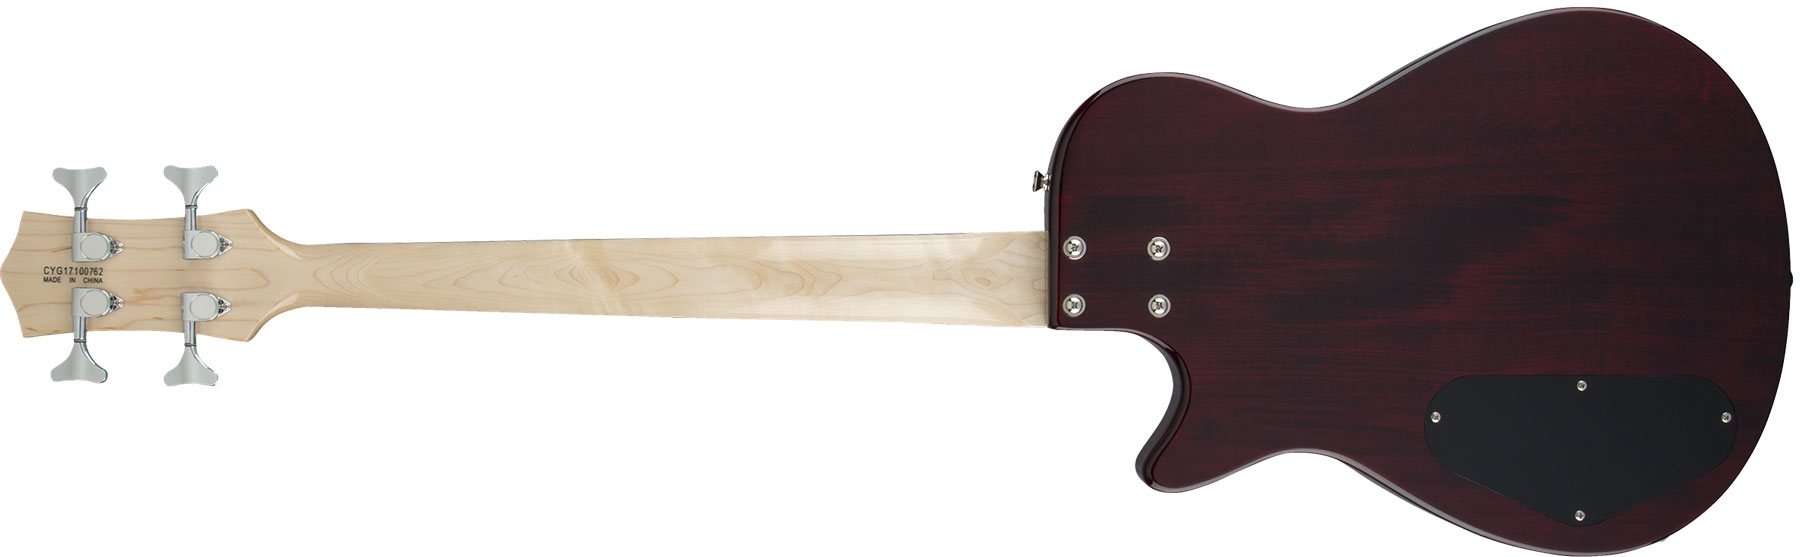 Gretsch G2220 Junior Jet Bass Ii Short Scale Electromatic Wal - Walnut Stain - Electric bass for kids - Variation 1